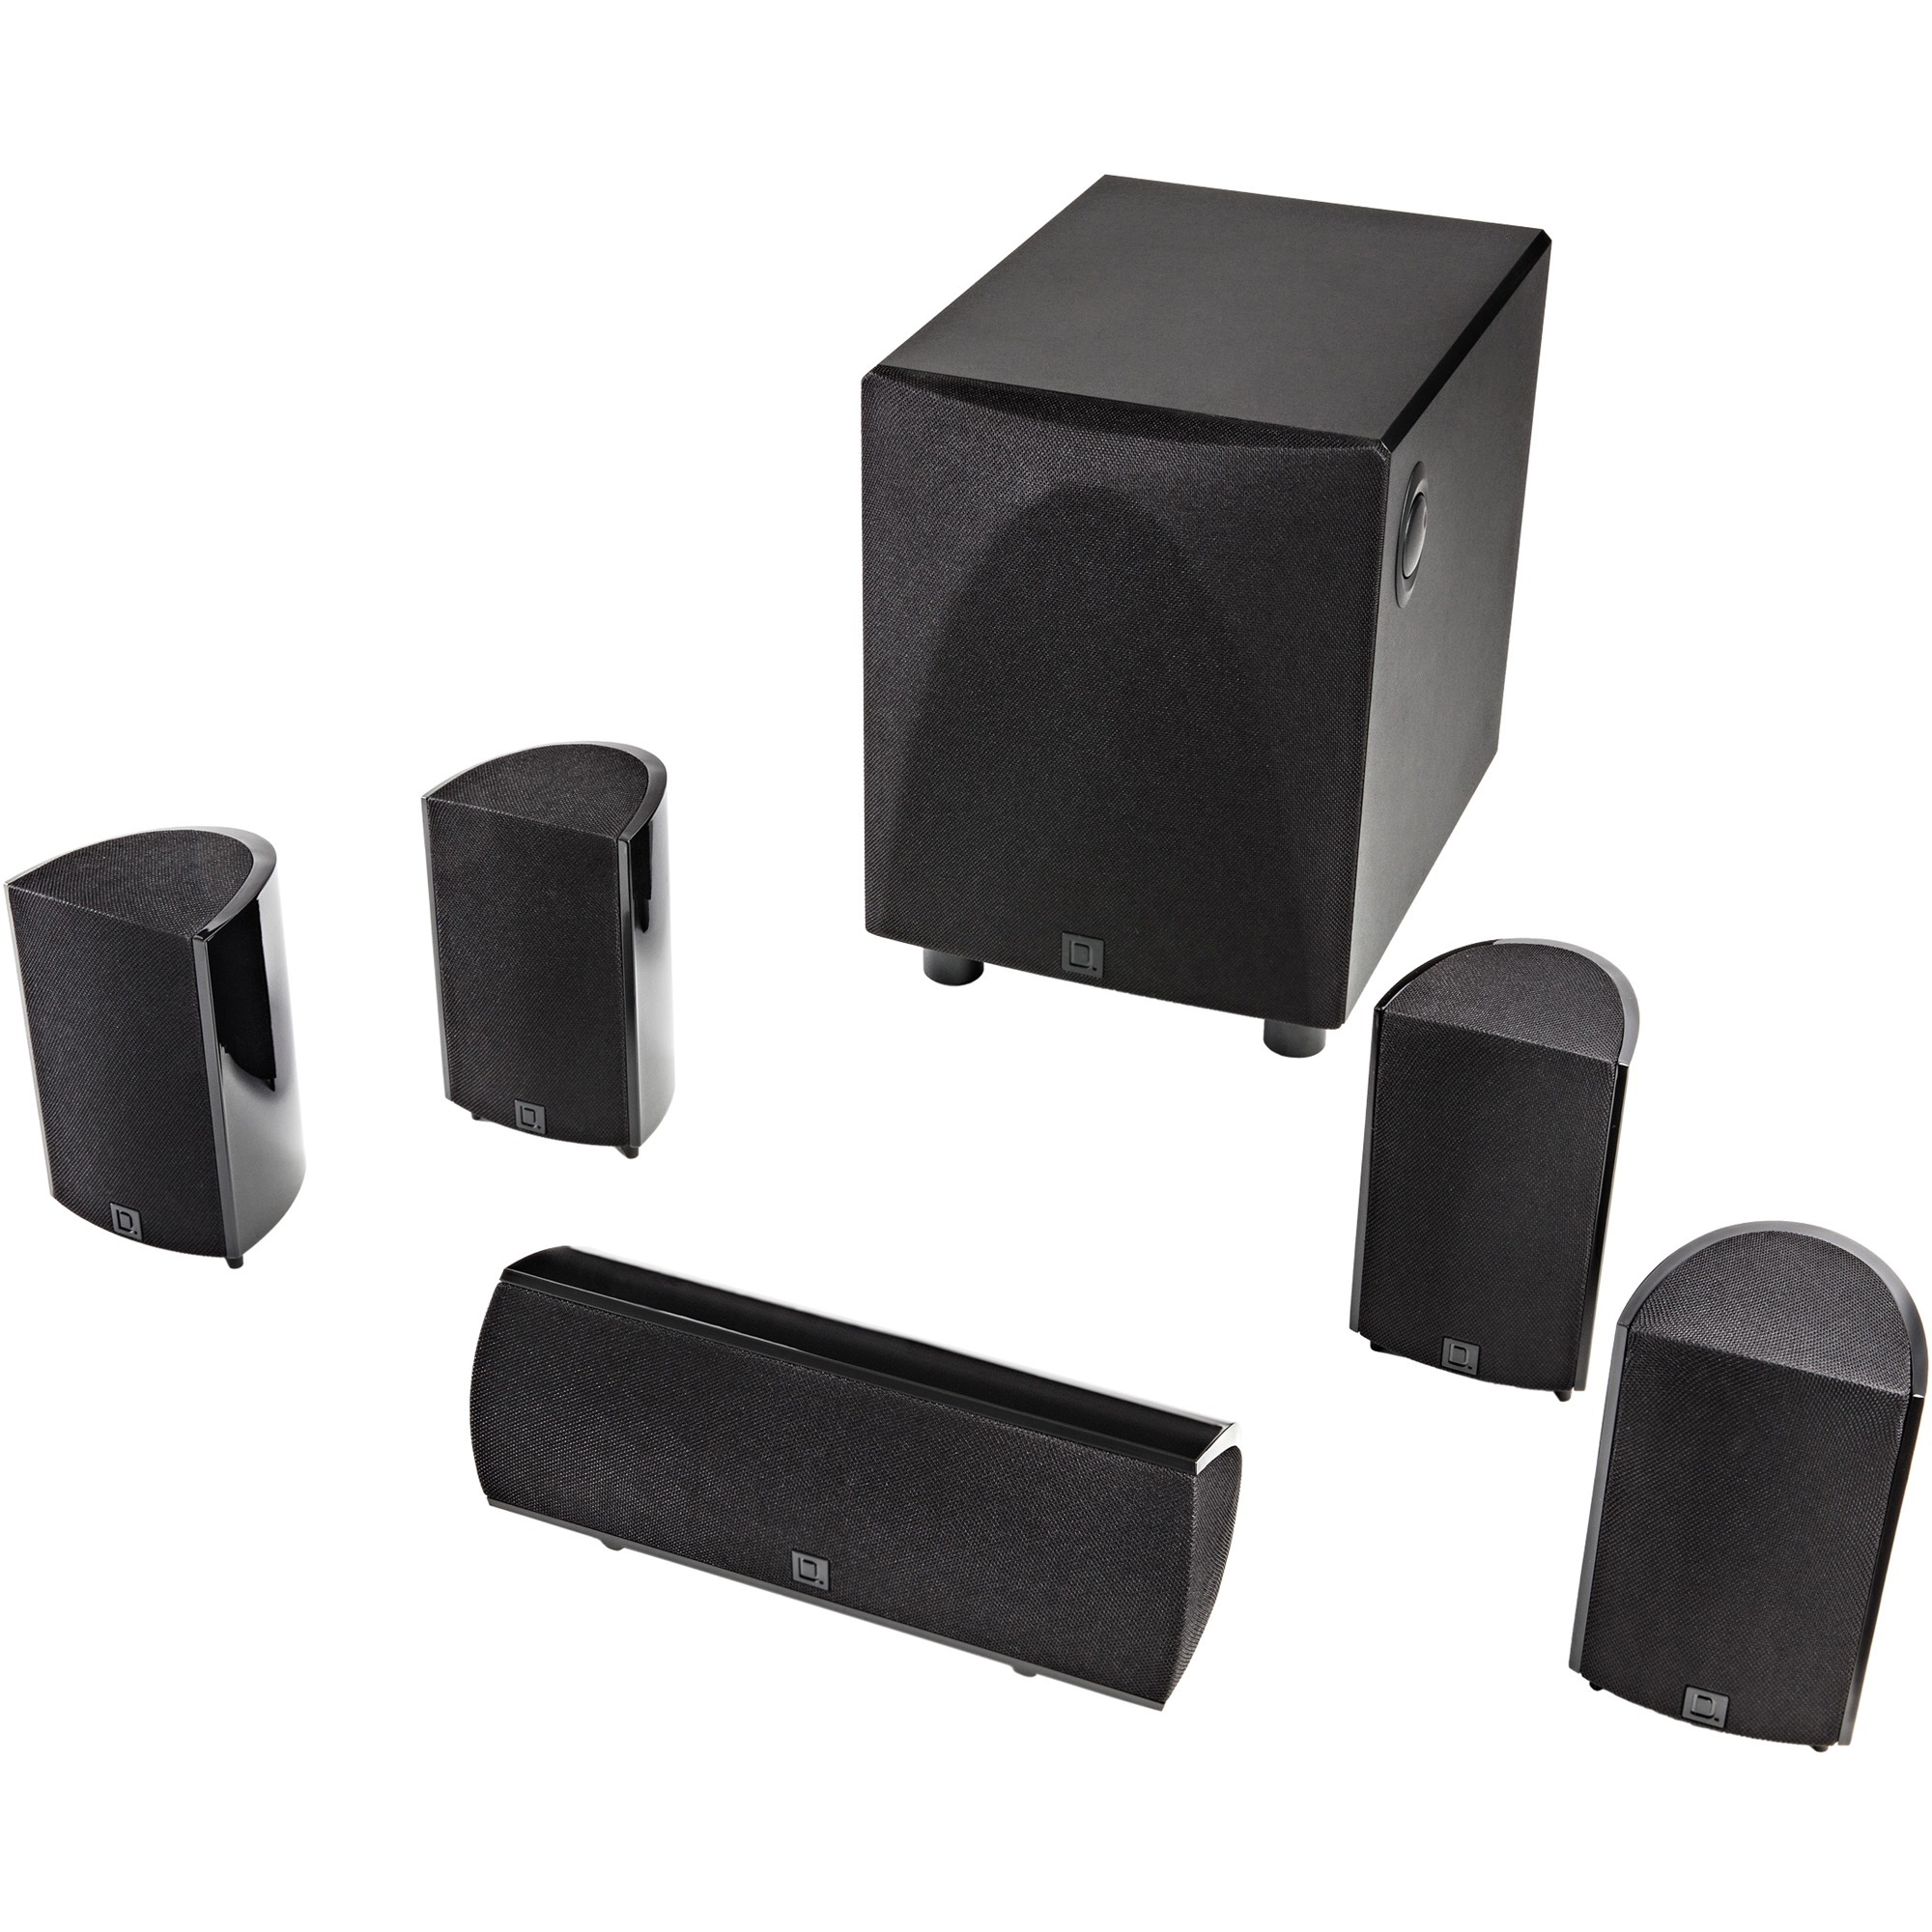 ProCinema Series 5.1 Channel High-Performance Compact Surround Sound System - image 1 of 17